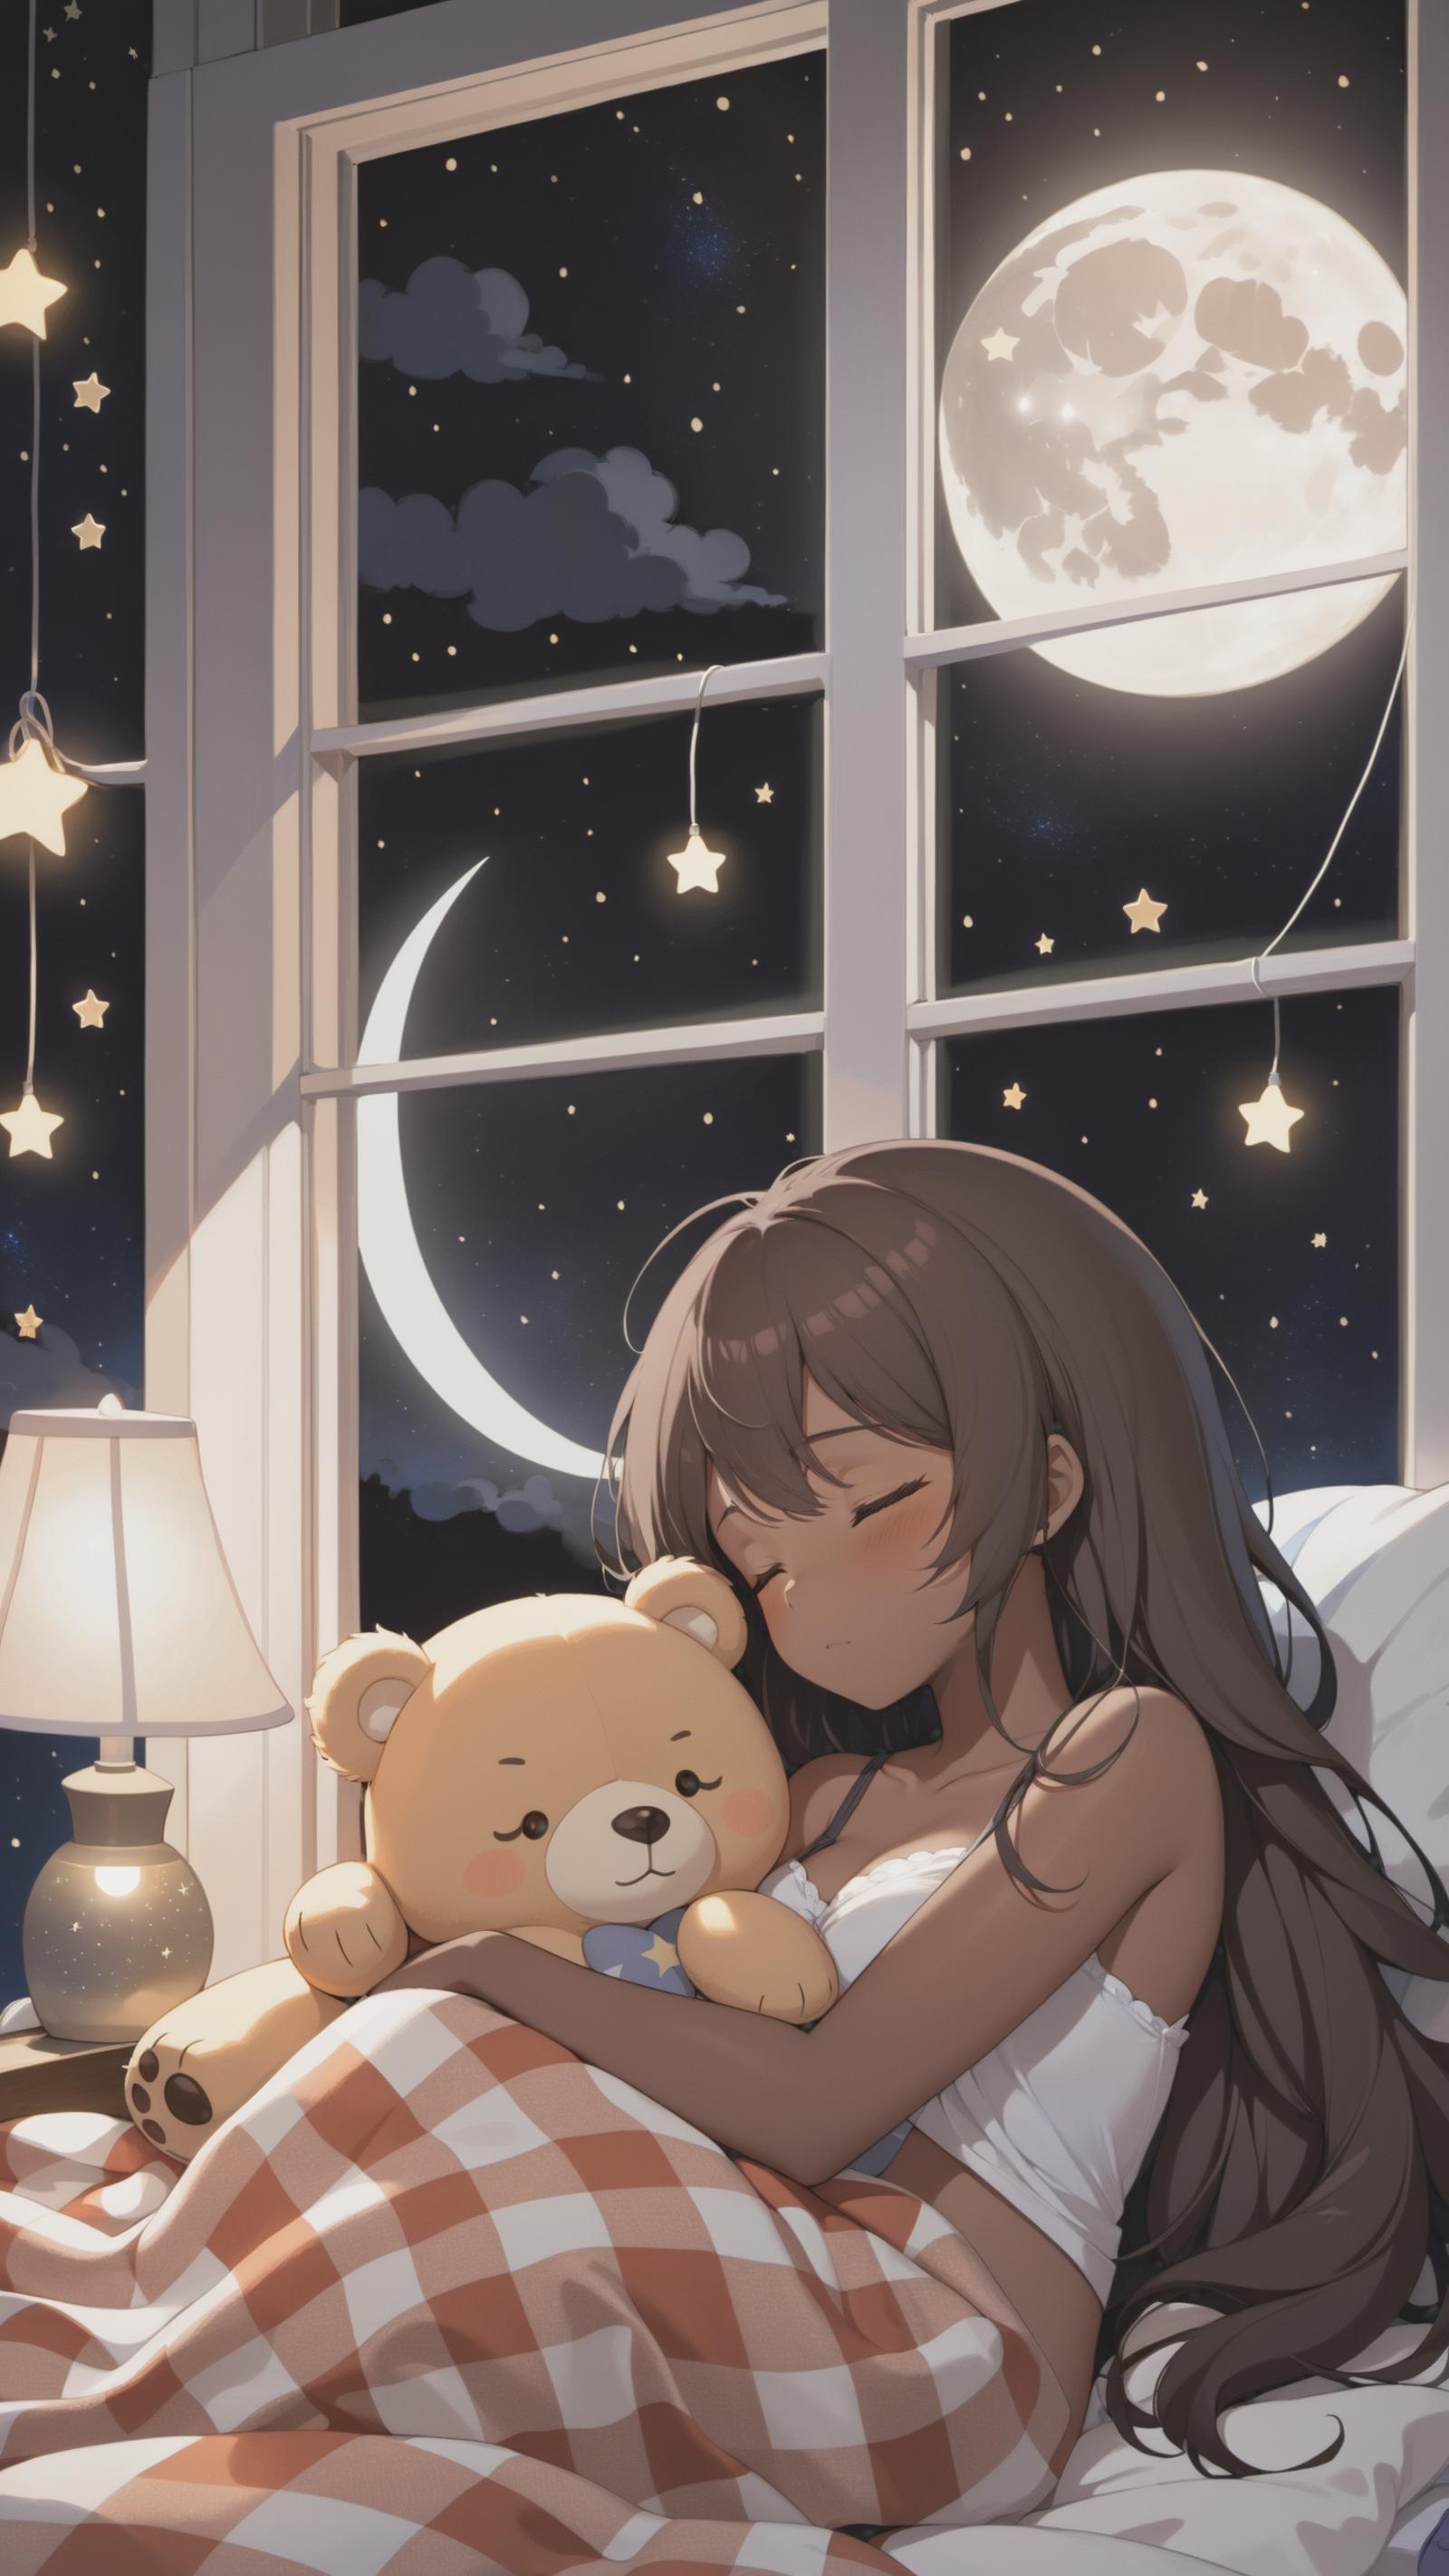 A woman sleeping with a teddy bear in a bedroom at night.